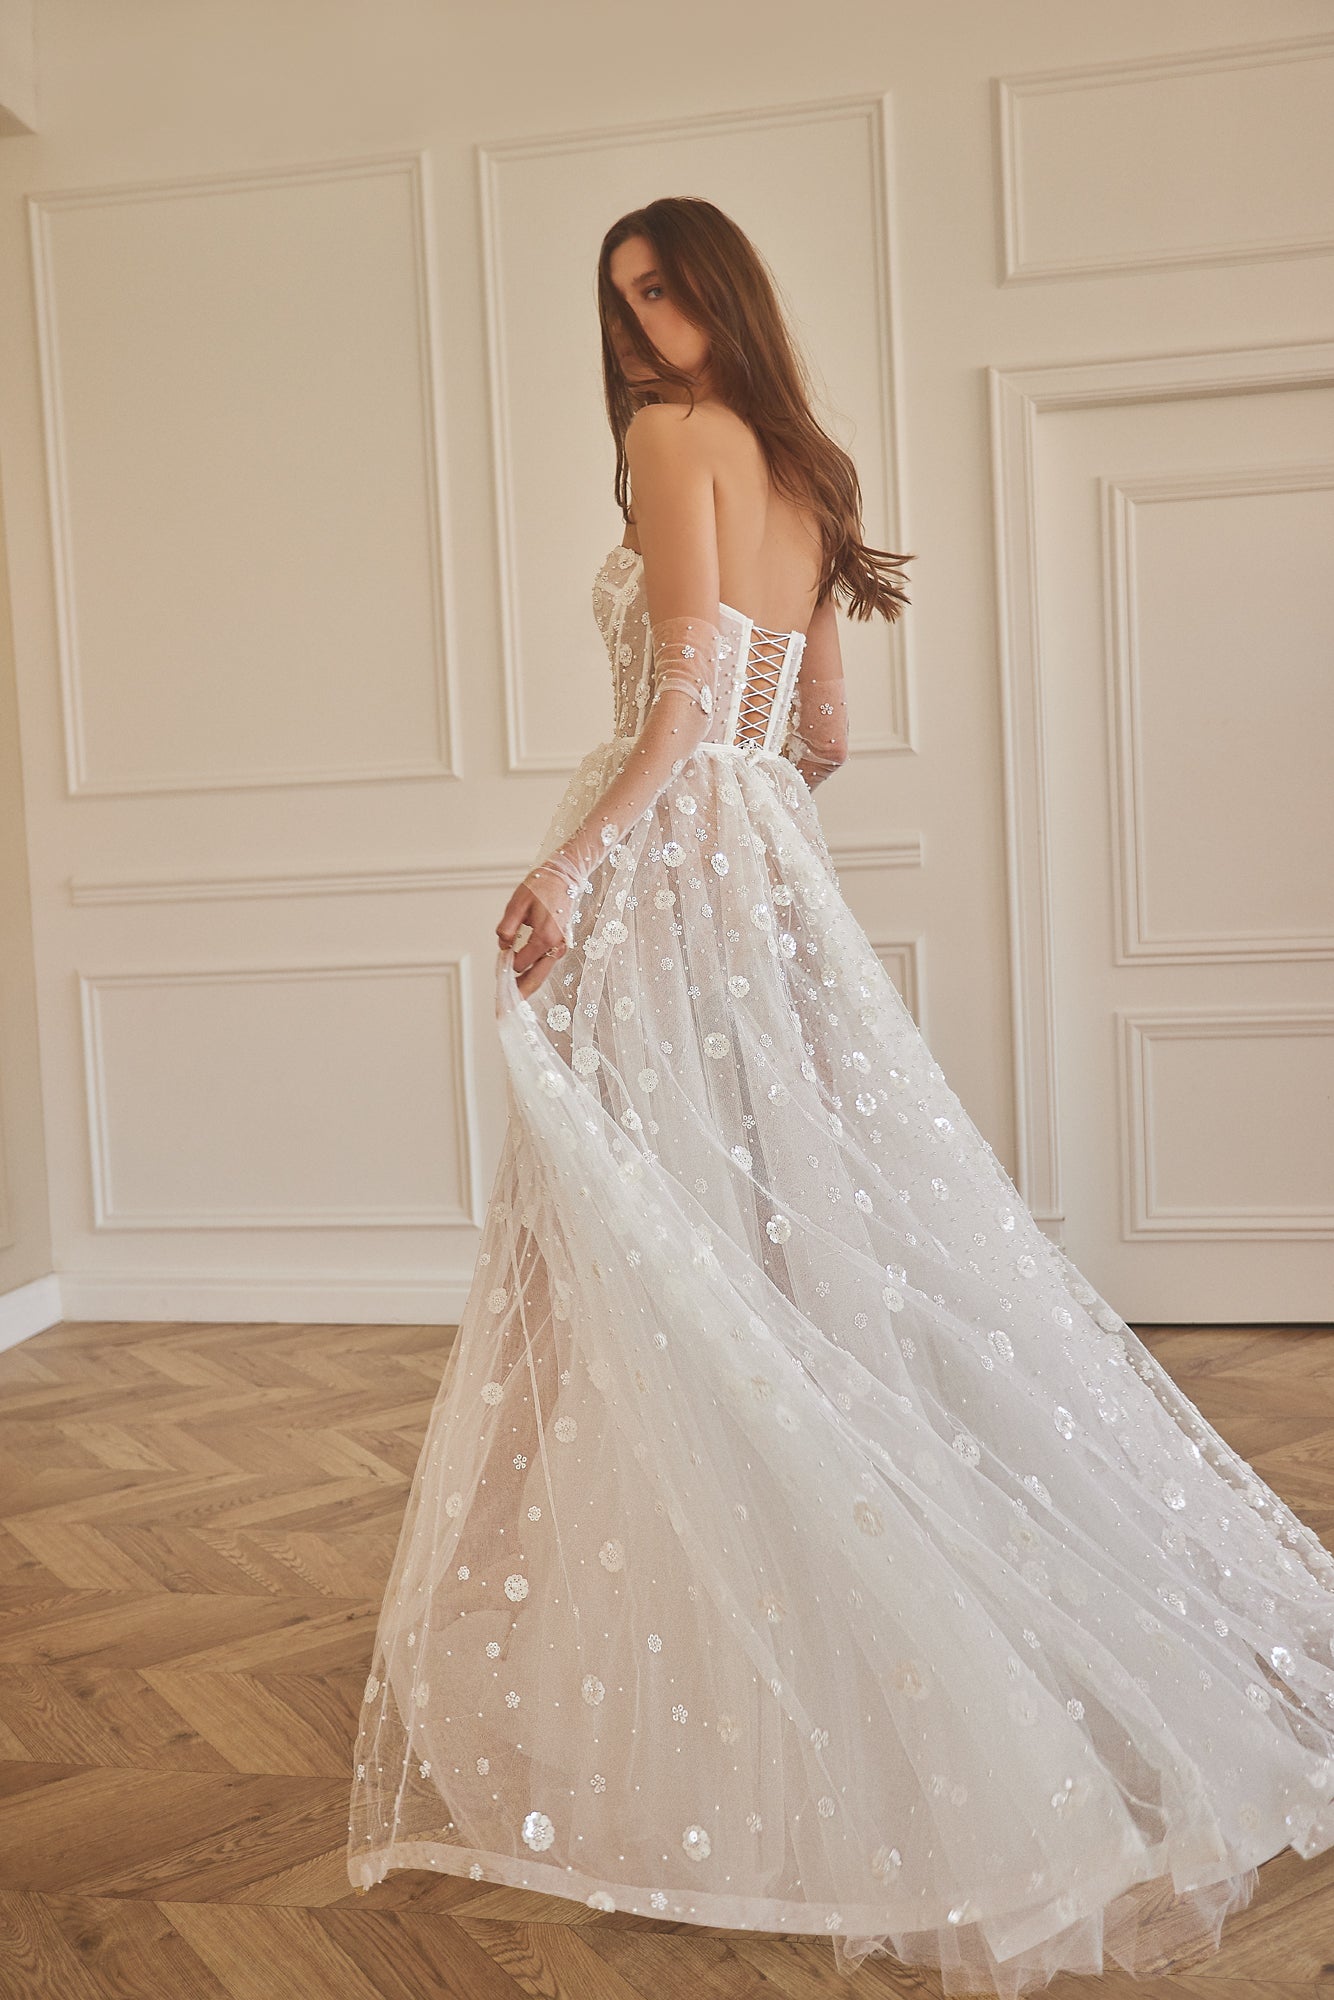 Floral And Pearl Tulle Skirt With Slit by REVEAL by Tal Kedem - Image 2